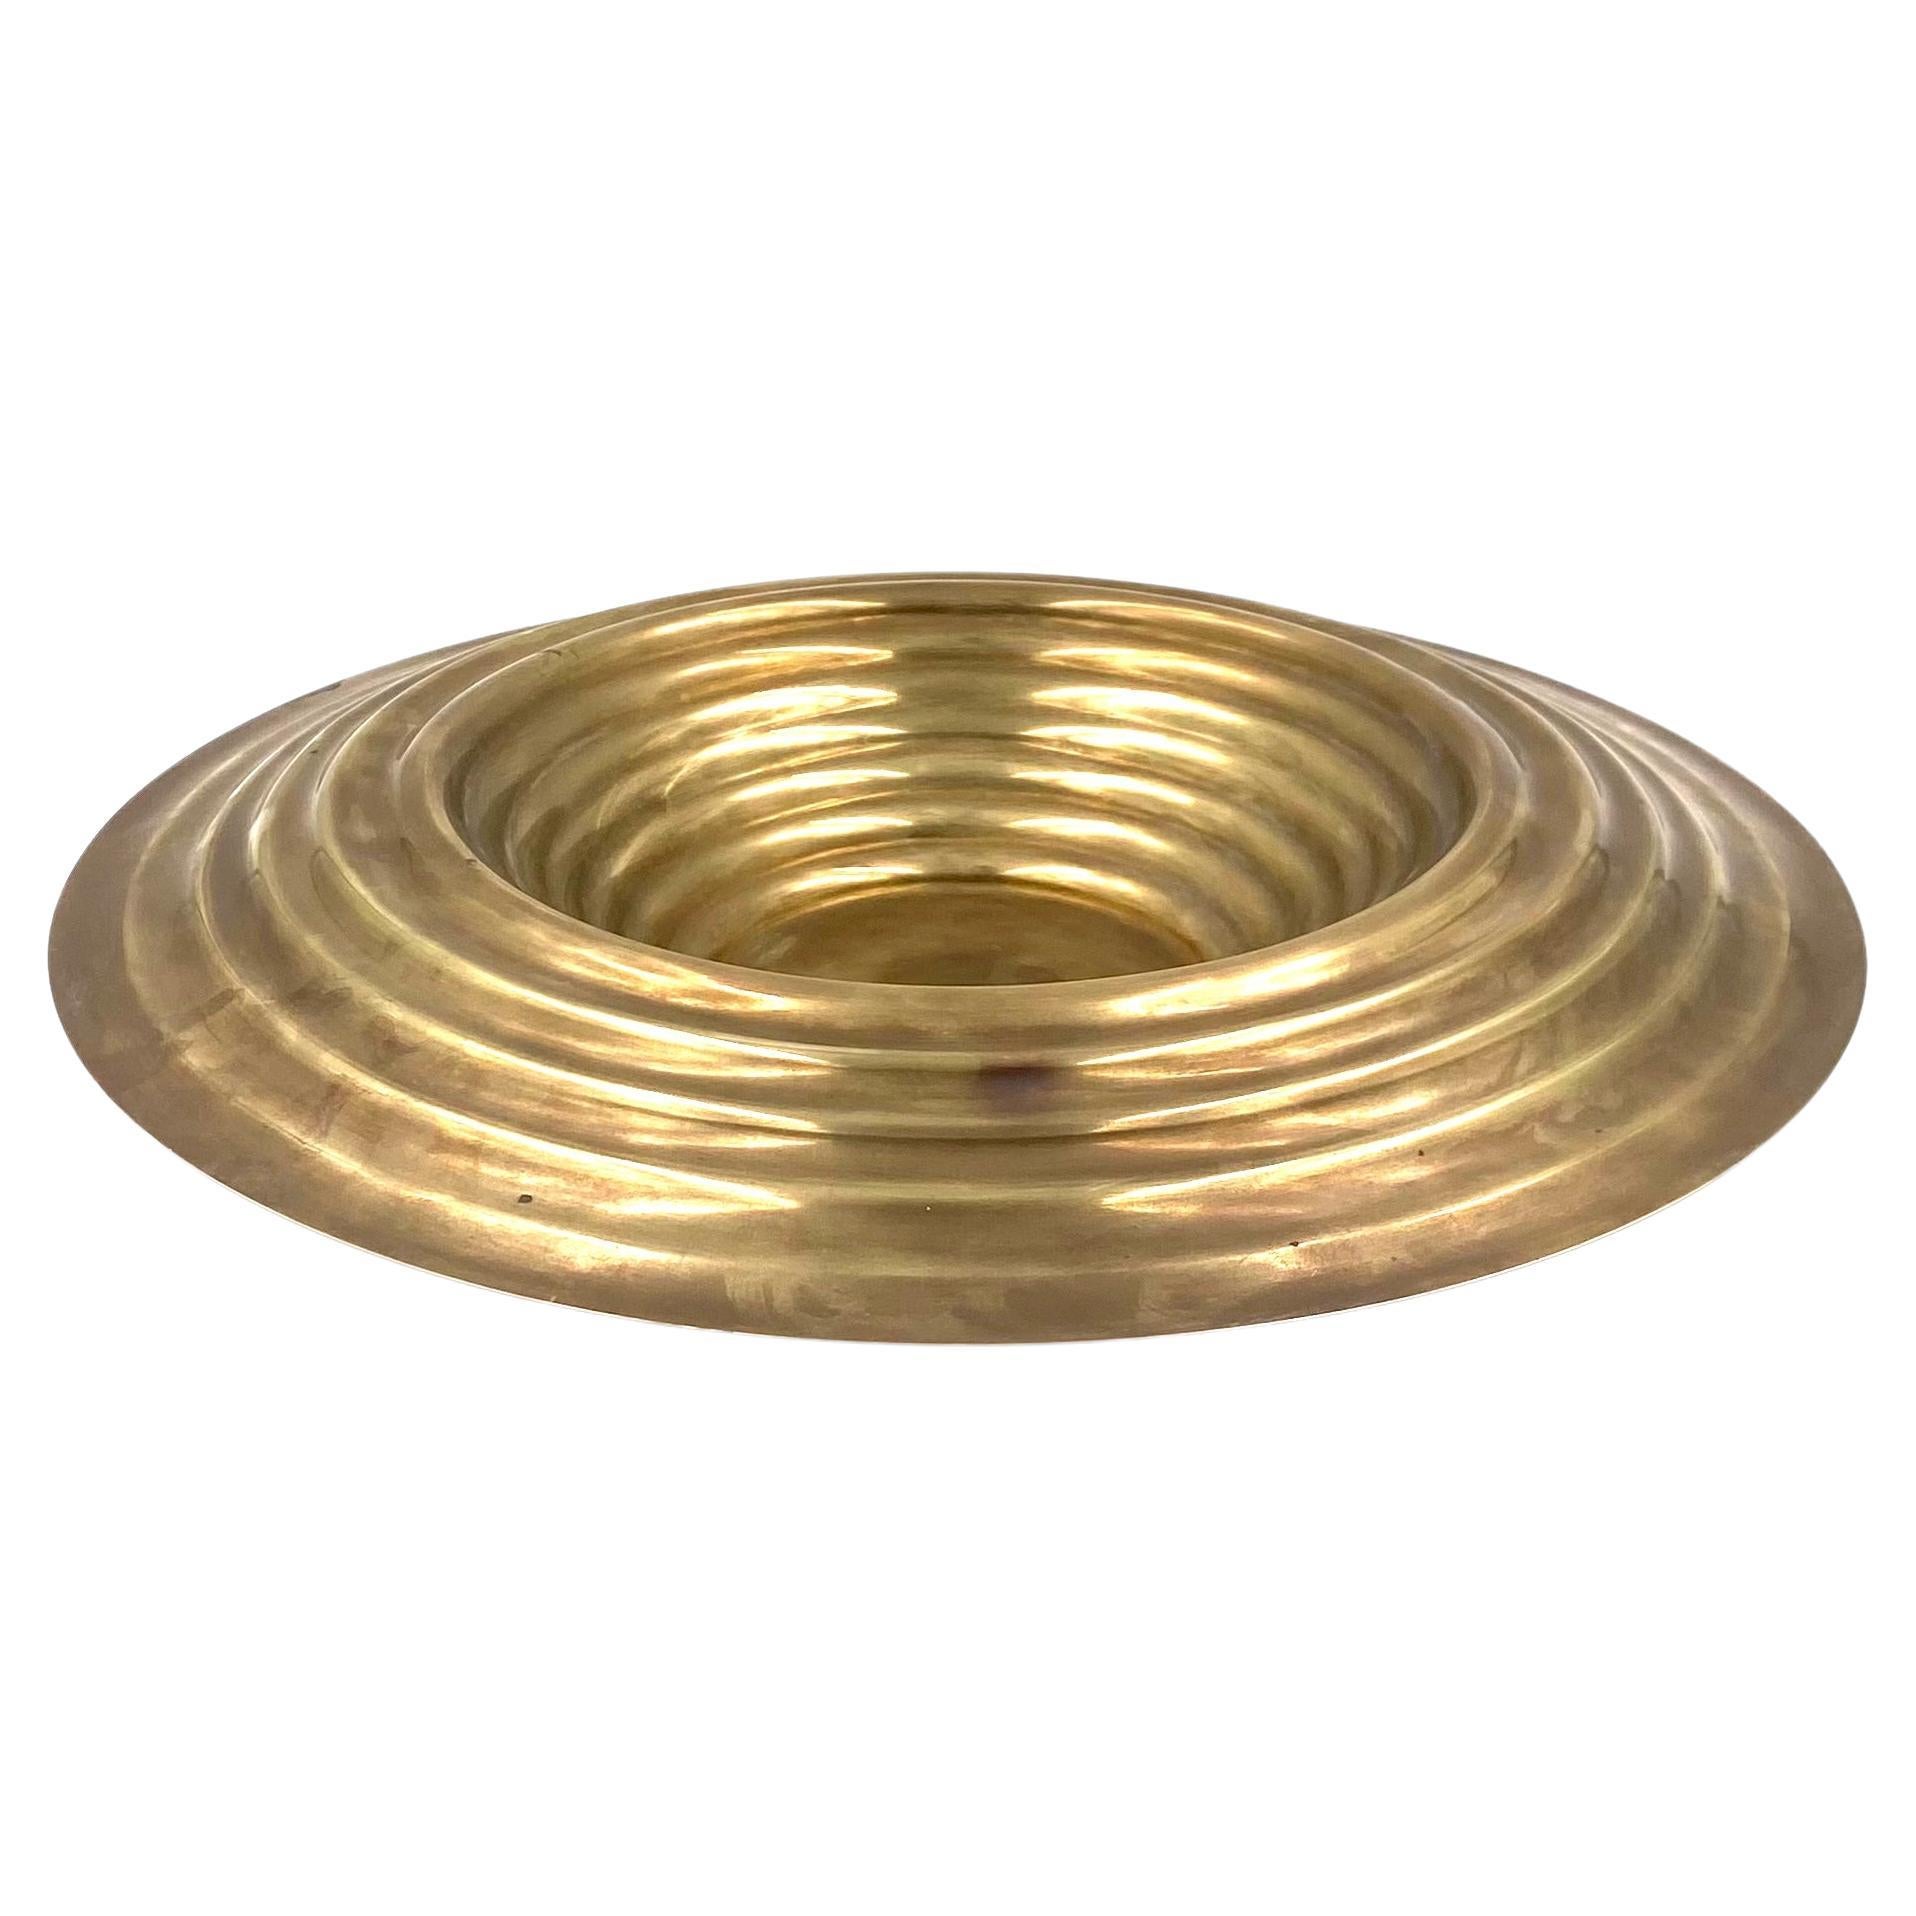 Large brass grooved centerpiece / vide poche, Italy 1970s